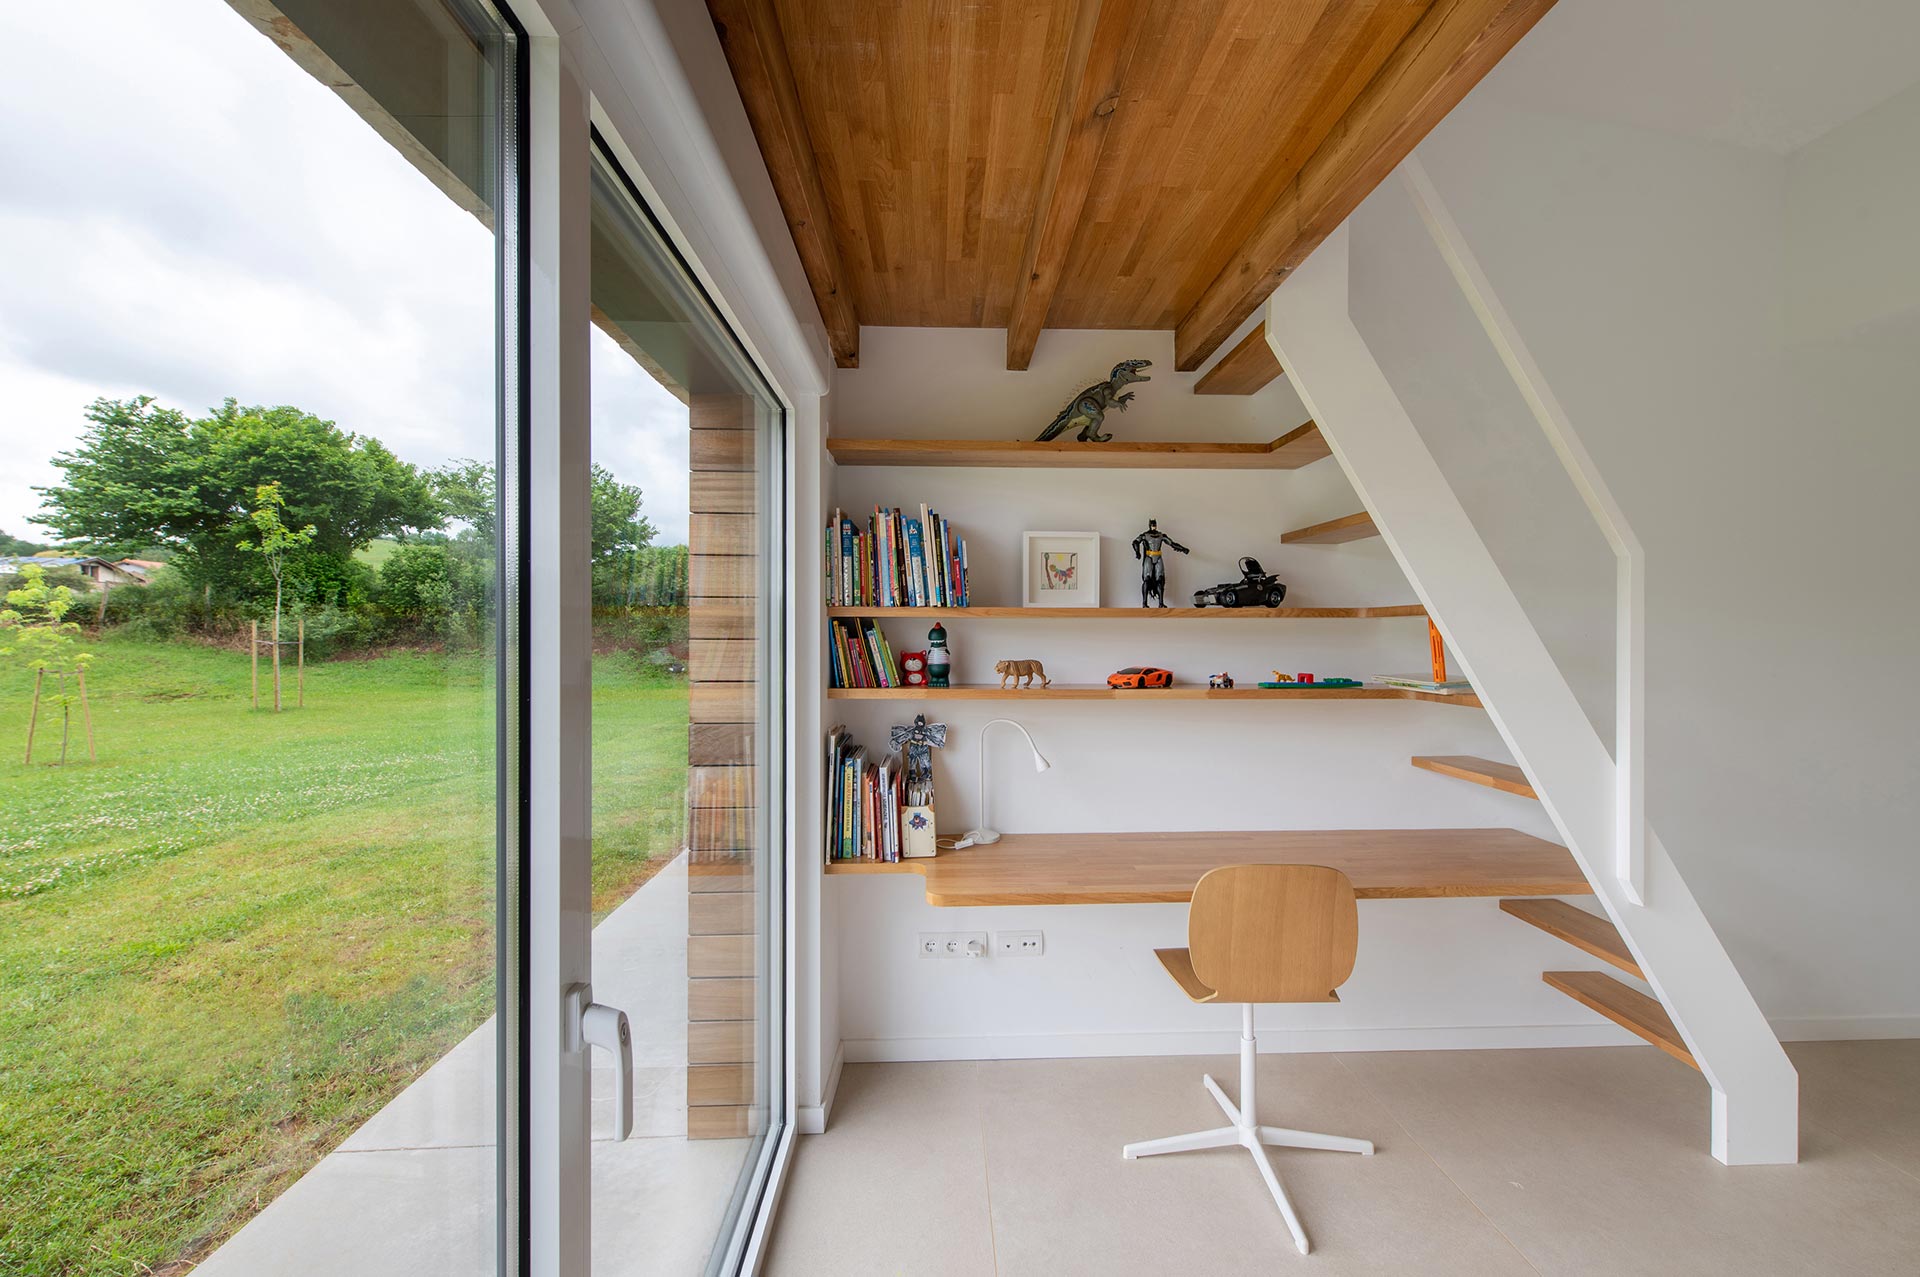 Wardrove in modern house with garden designed by Moah Architects in Pámanes